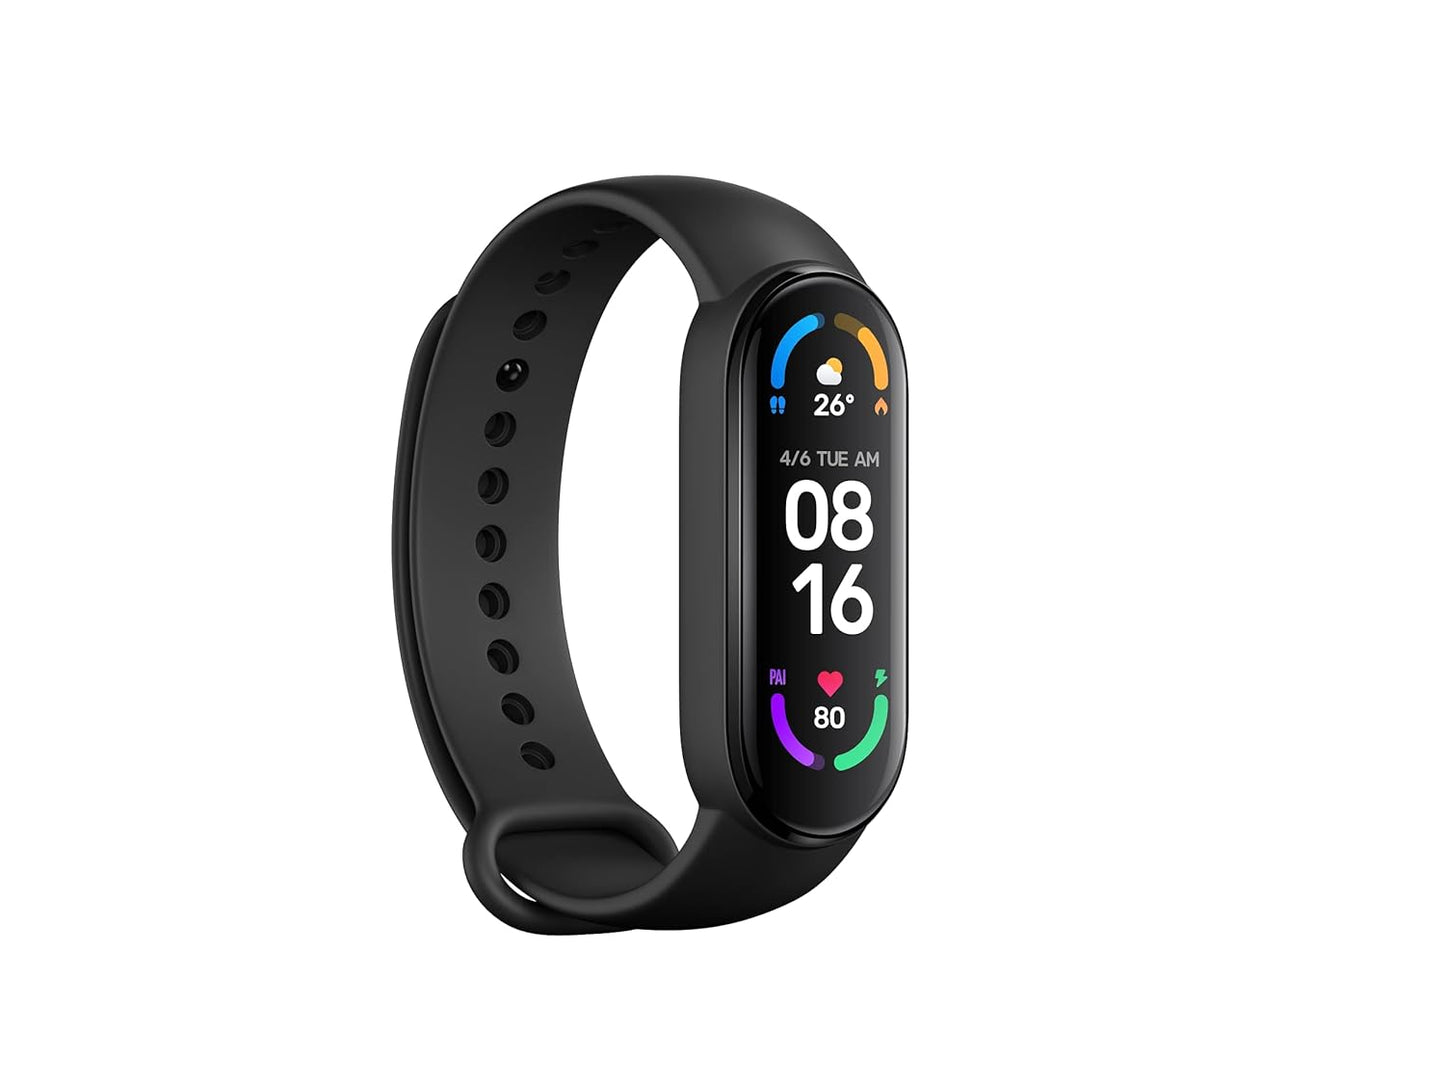 (Open Box) Xiaomi Mi Smart Band 6-1.56'' (3.96 cm) Large AMOLED Color Display, 2 Week Battery Life, 30 Fitness Mode, 5 ATM, SpO2, HR, Sleep Monitoring, Women's Health Tracking, Alarm, Music Control (Black)